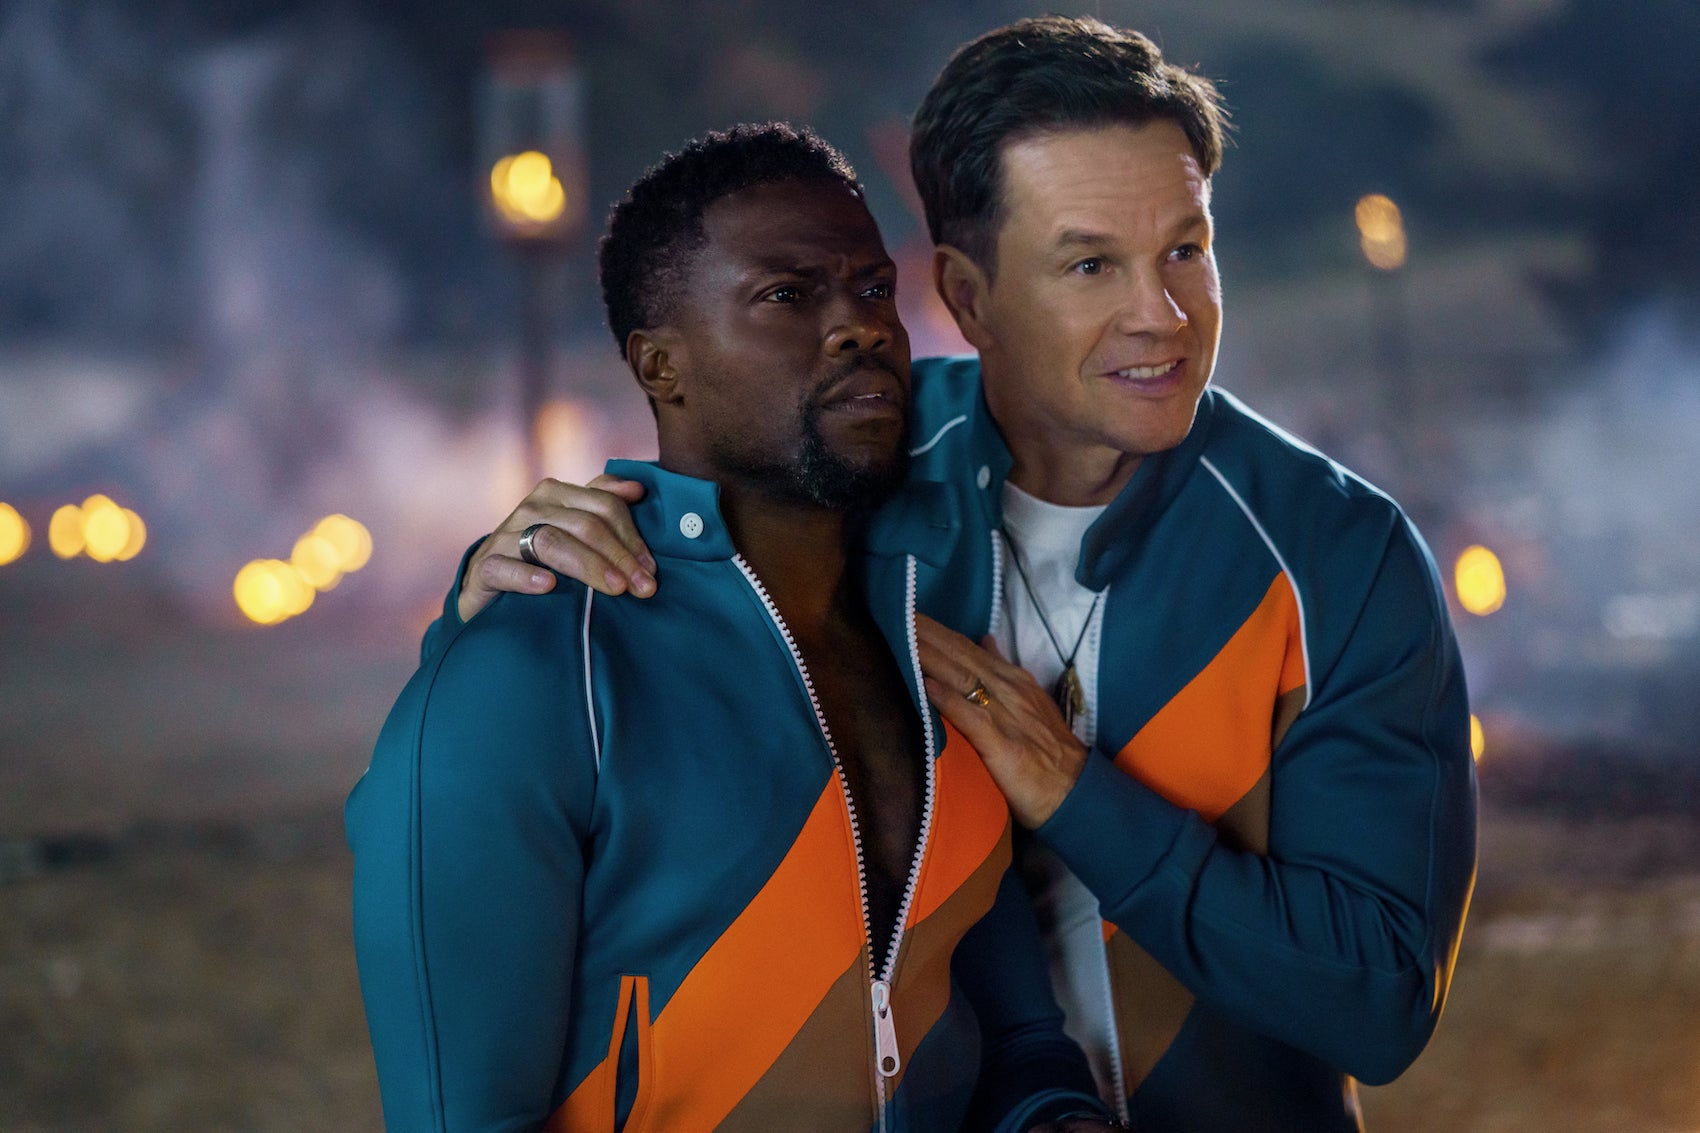 Kevin Hart and Mark Wahlberg in "Me Time."